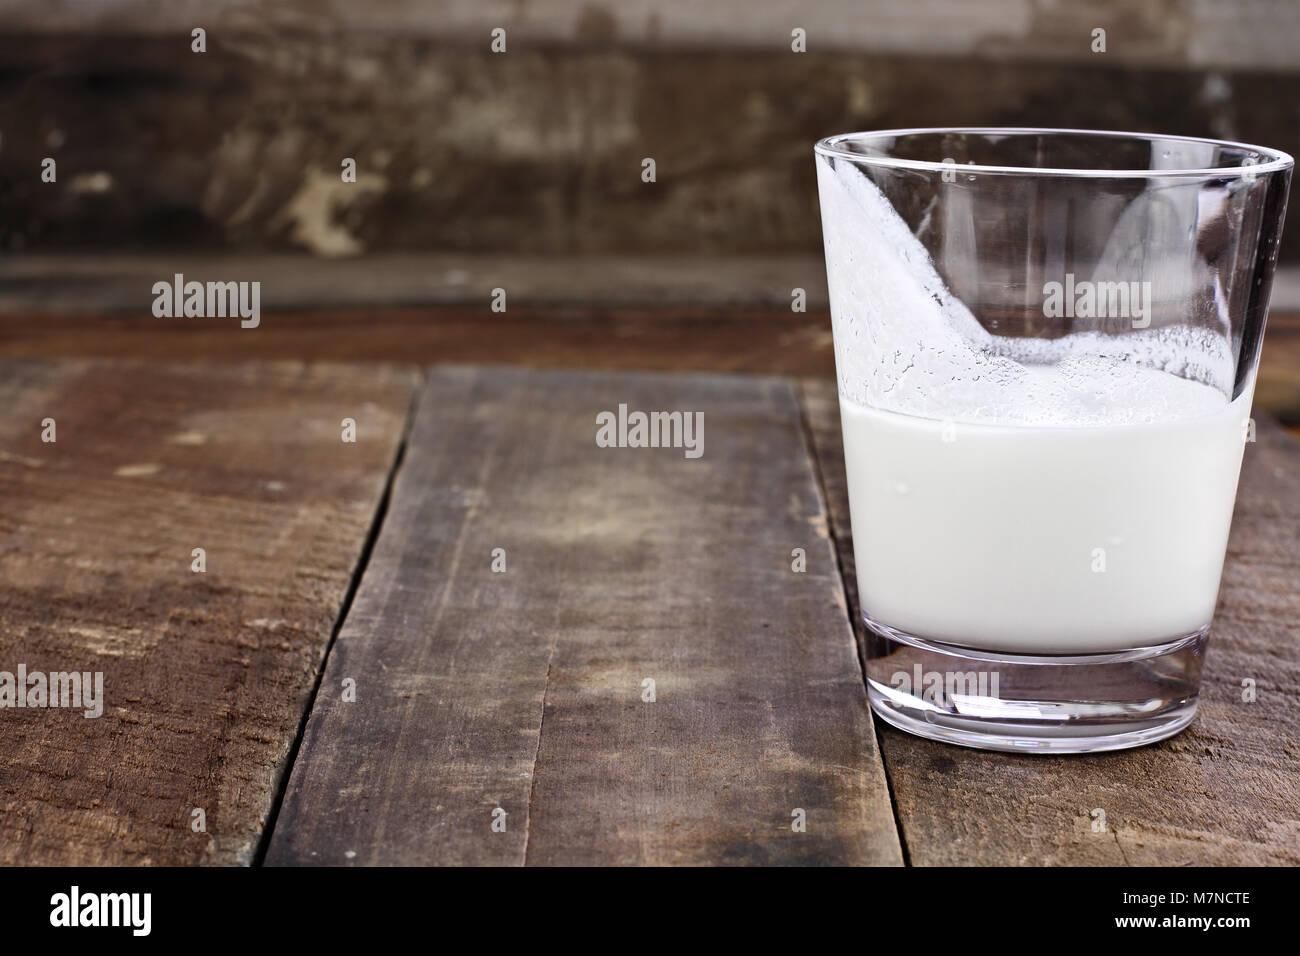 Kefir milk over rustic wooden background. Kefir is one of the top health foods available providing powerful probiotics. Stock Photo